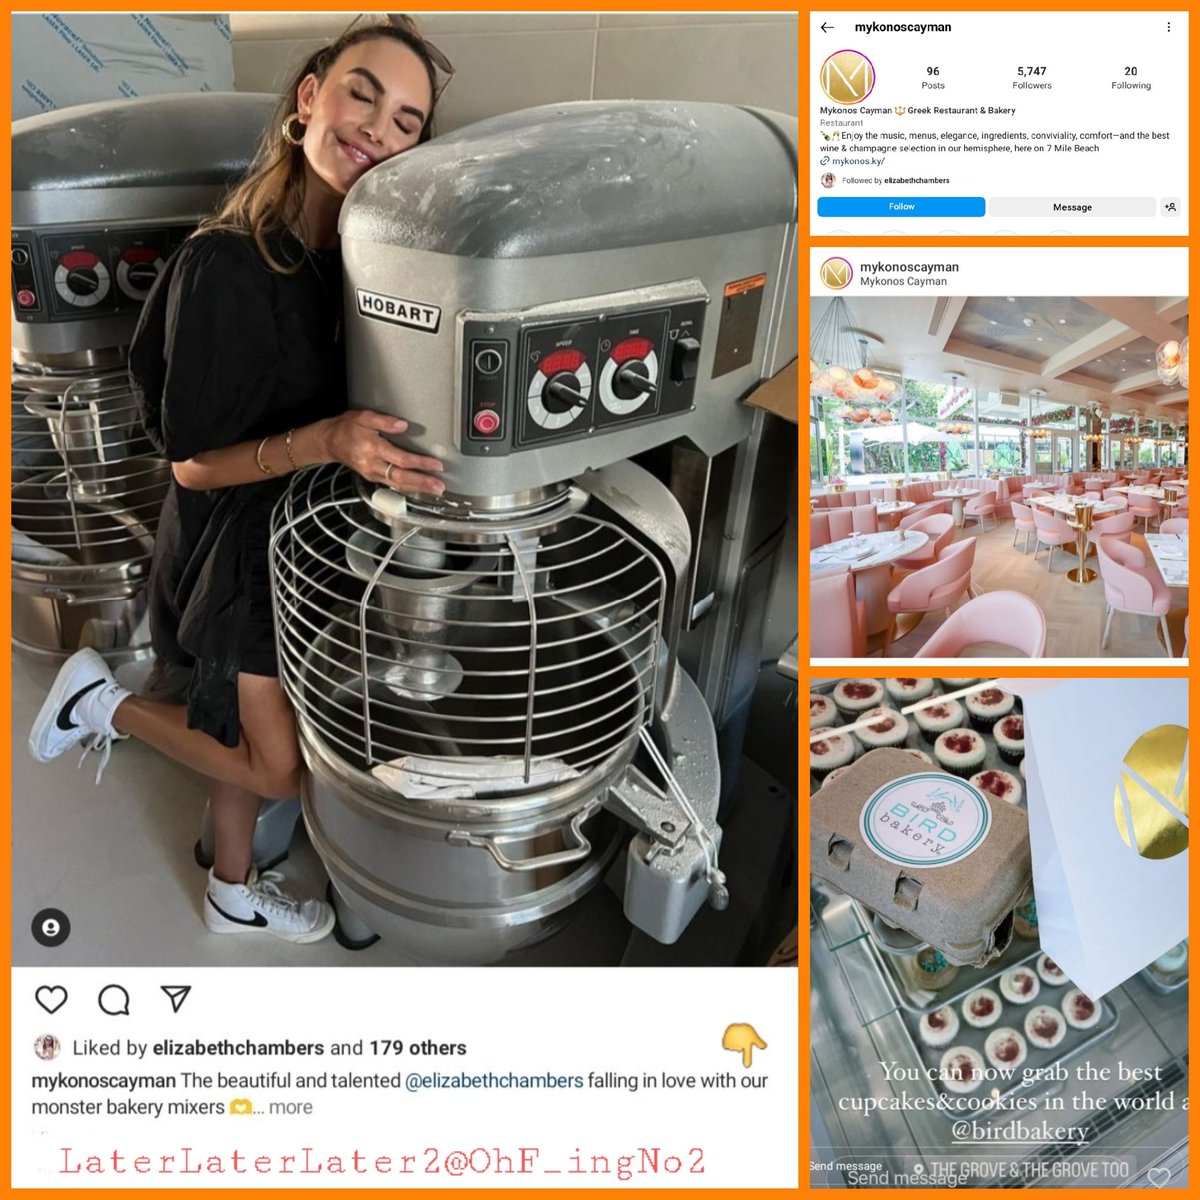 @graziatweets your article is misleading.
This is NOT #BirdBakery Cayman but her shop in #SanAntonio.
#ElizabethChambers misrepresents her LOCATION in #mykonoscayman, a restaurant where she has SHELF DISPLAYS of her wares, as a full fledged eatery, when in reality it is NOT TRUE.